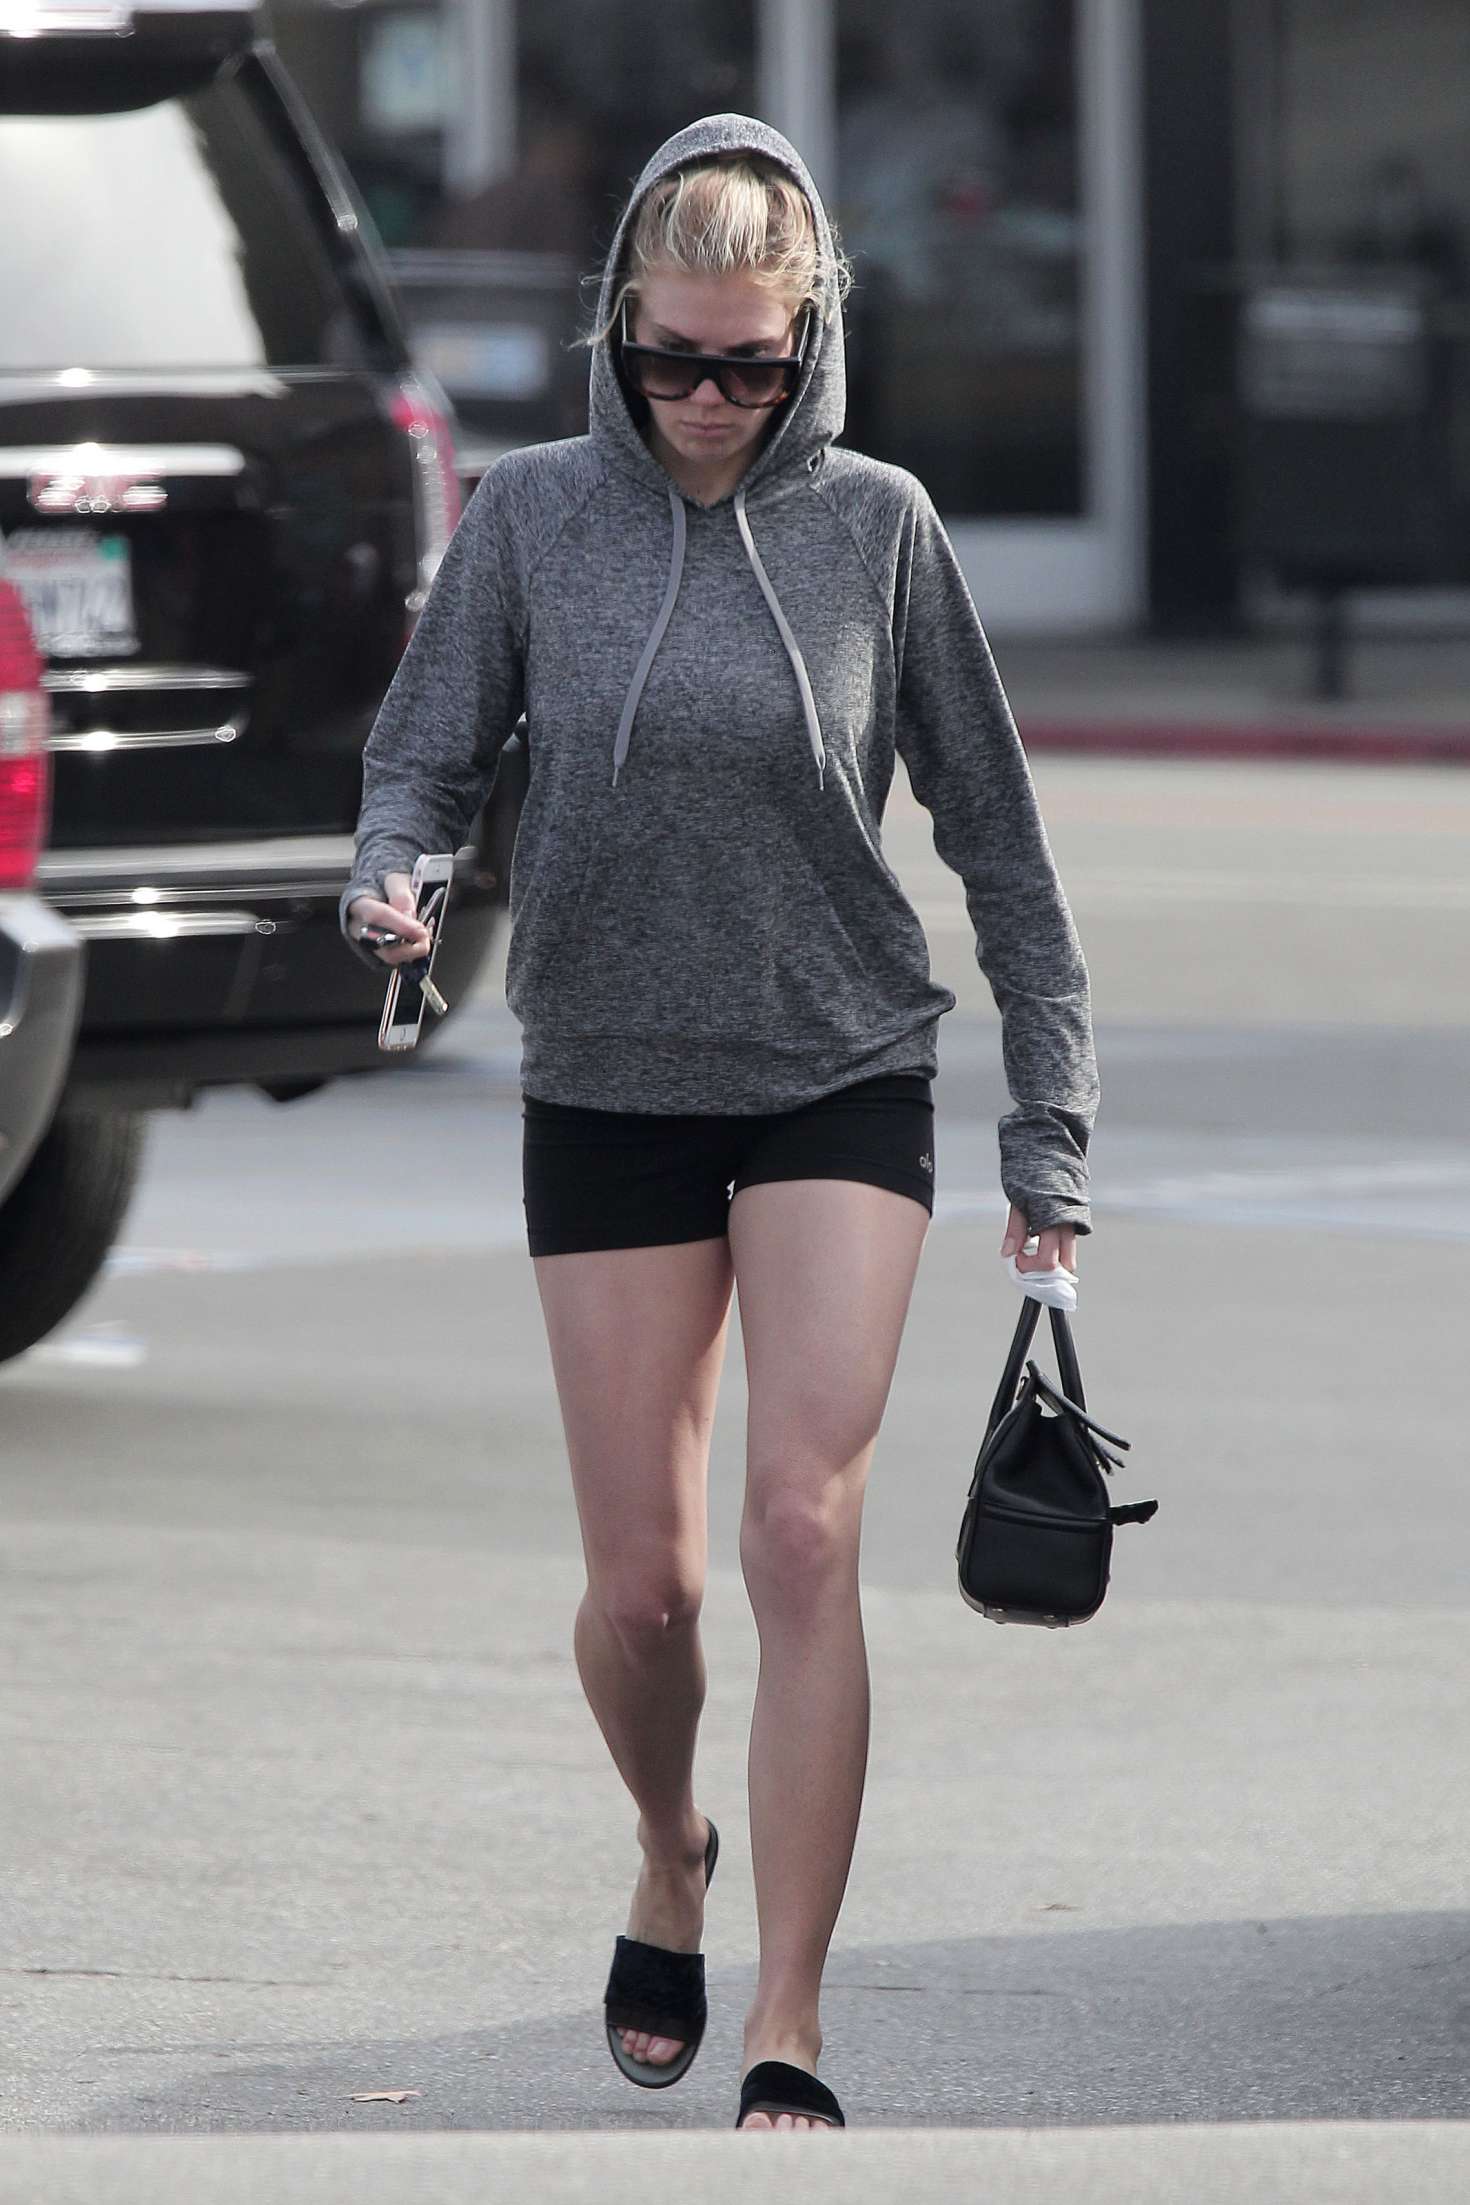 Charlotte McKinney in Tight Shorts in Brentwood1470 x 2205